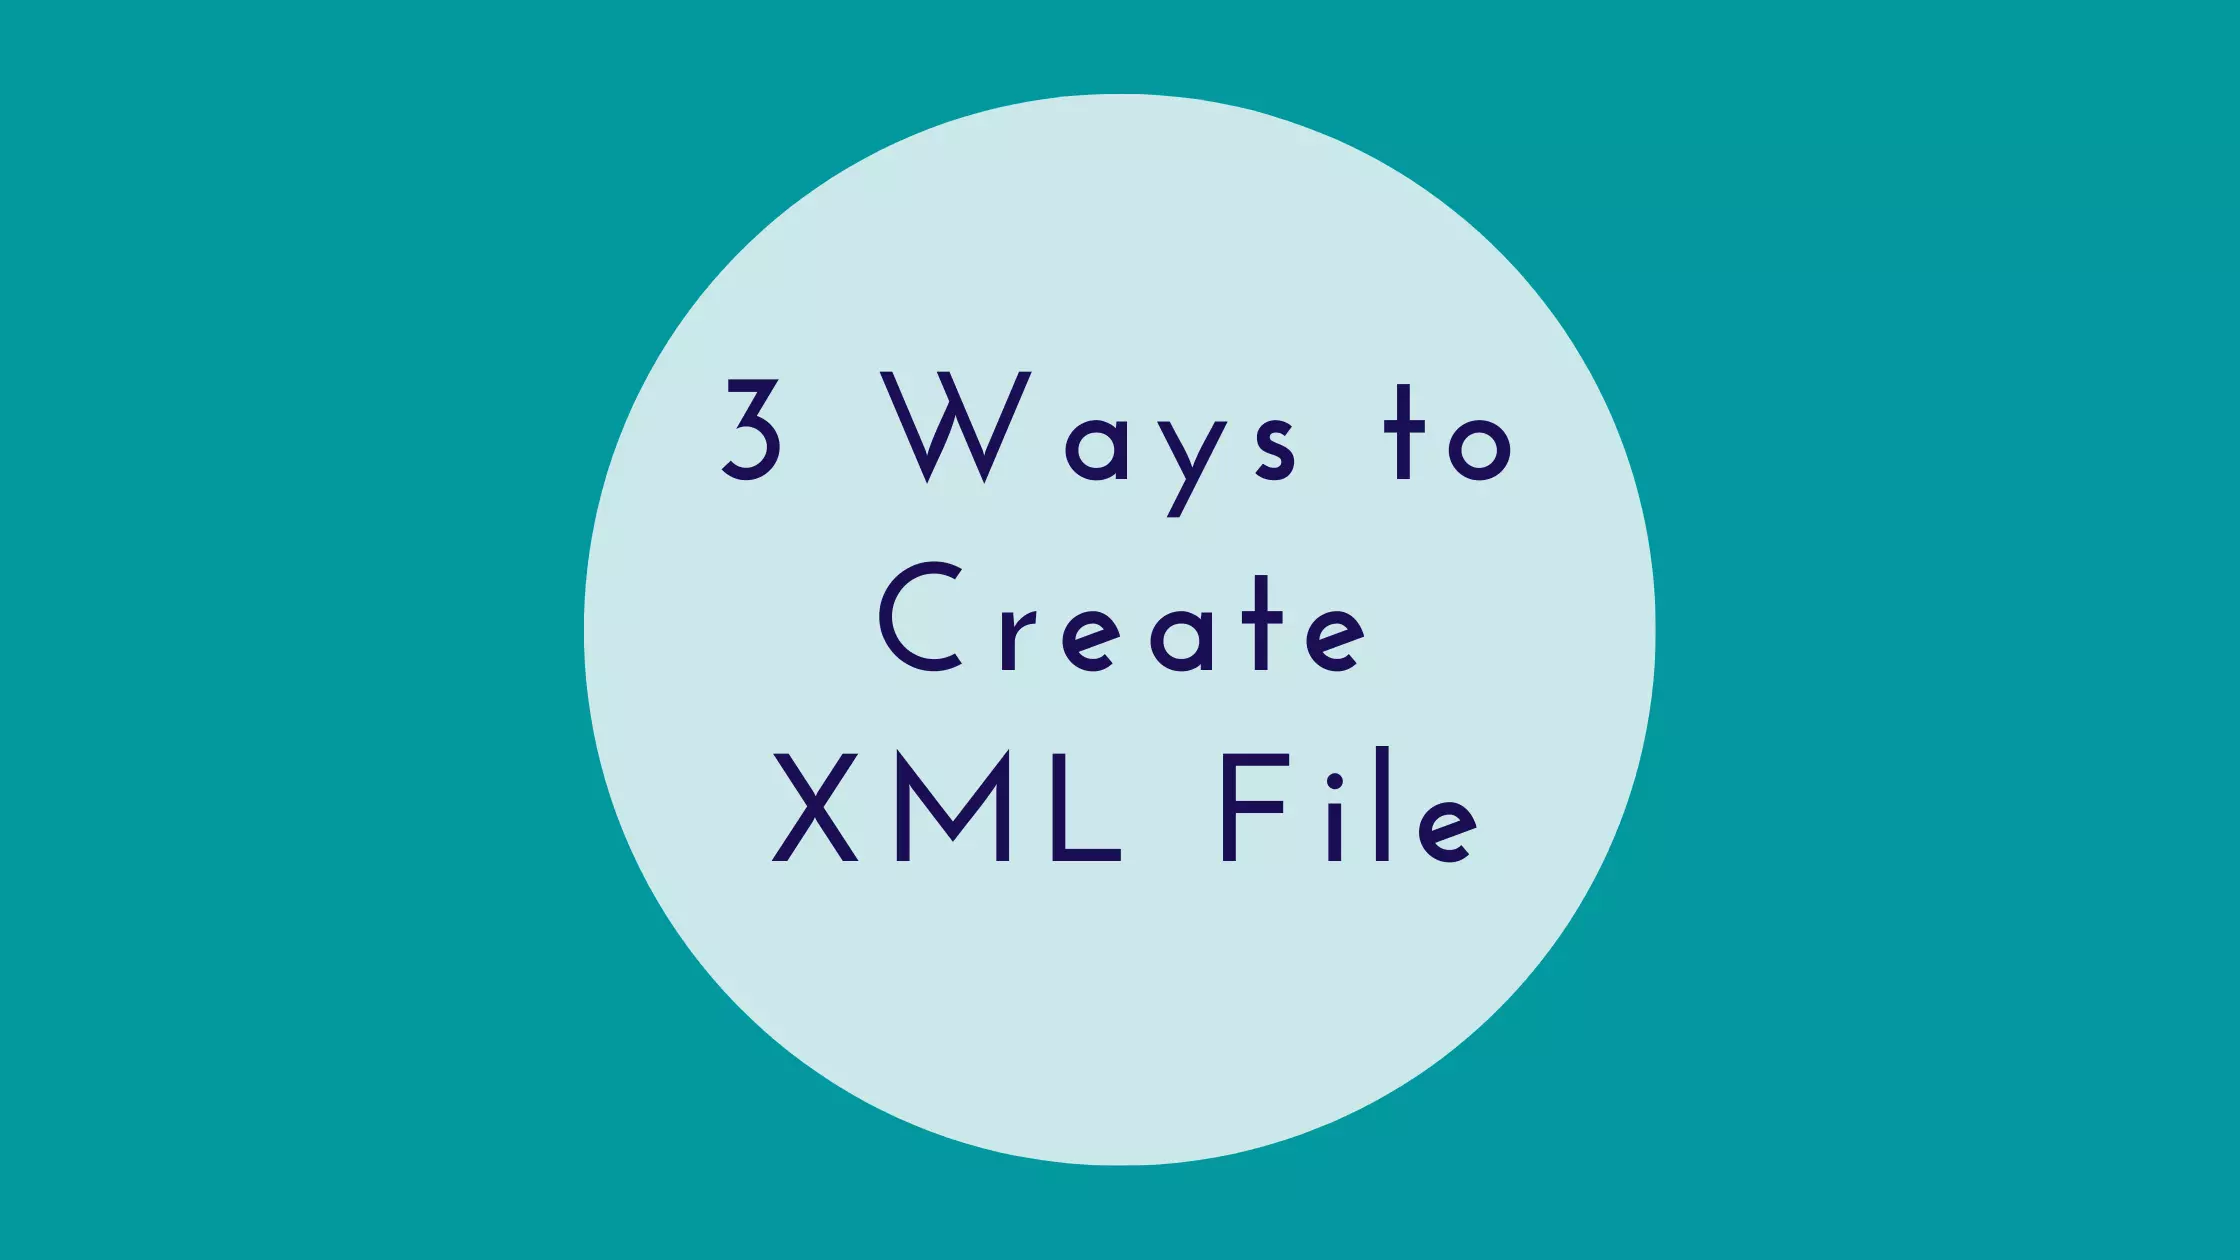 How to Create a XML File in a Few Simple Steps for Beginners